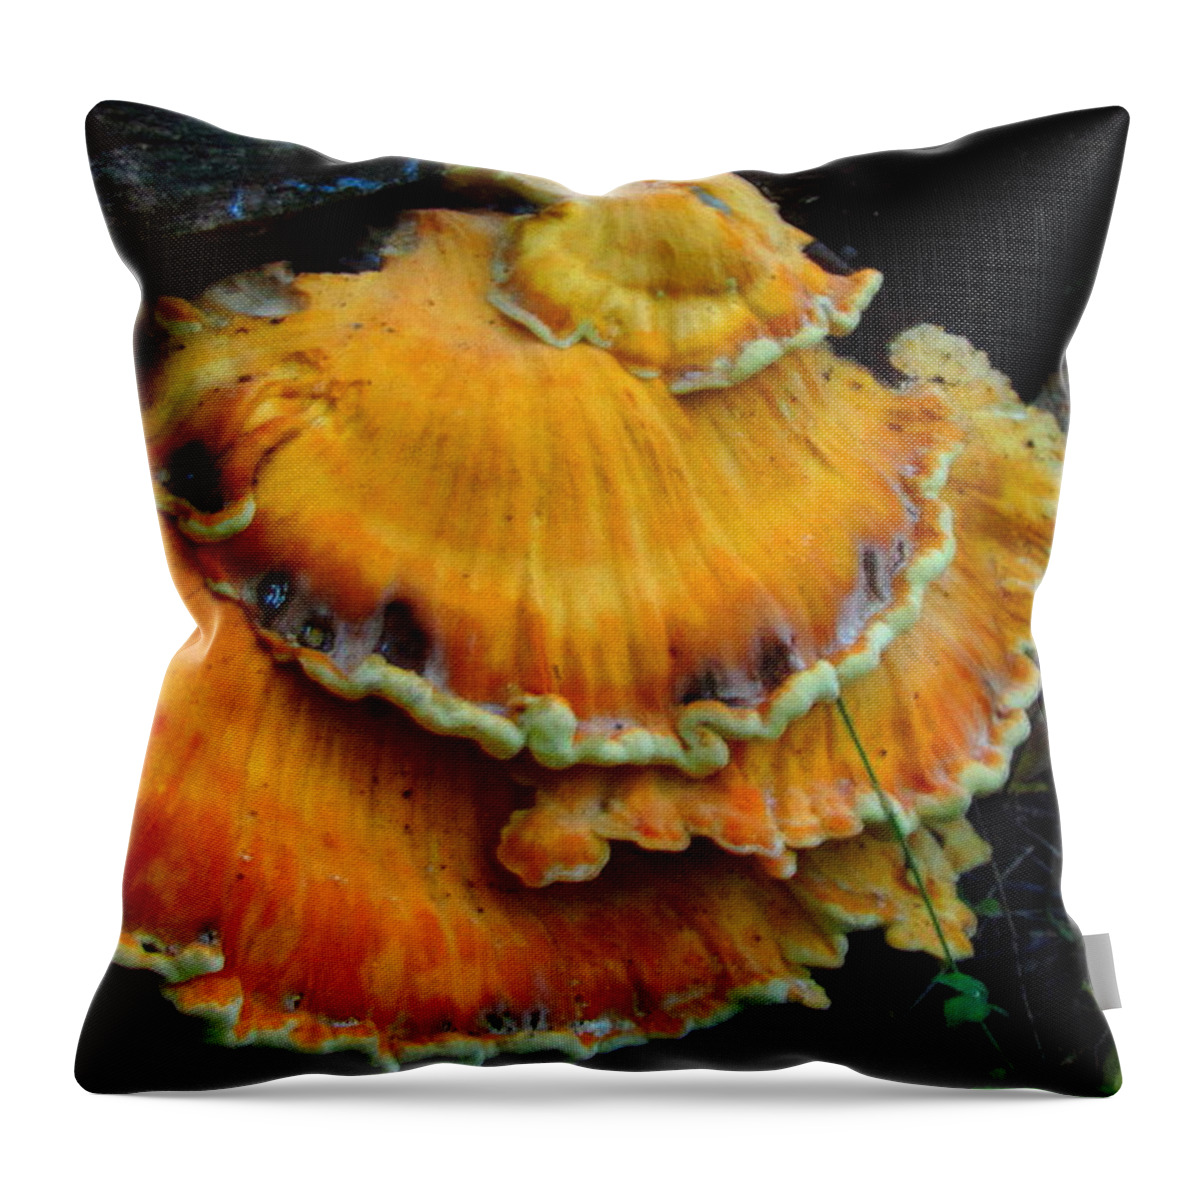 Polypore Images Bracket Mushroom Images Sulphur Shelf Prints Chicken Of The Woods Prints Edible Mushroom Pics Survival Skills Biodiversity Orange Shelf Fungi Images Nature Oldgrowth Forest Conservation Forest Ecology Throw Pillow featuring the photograph Sulphur Shelf by Joshua Bales